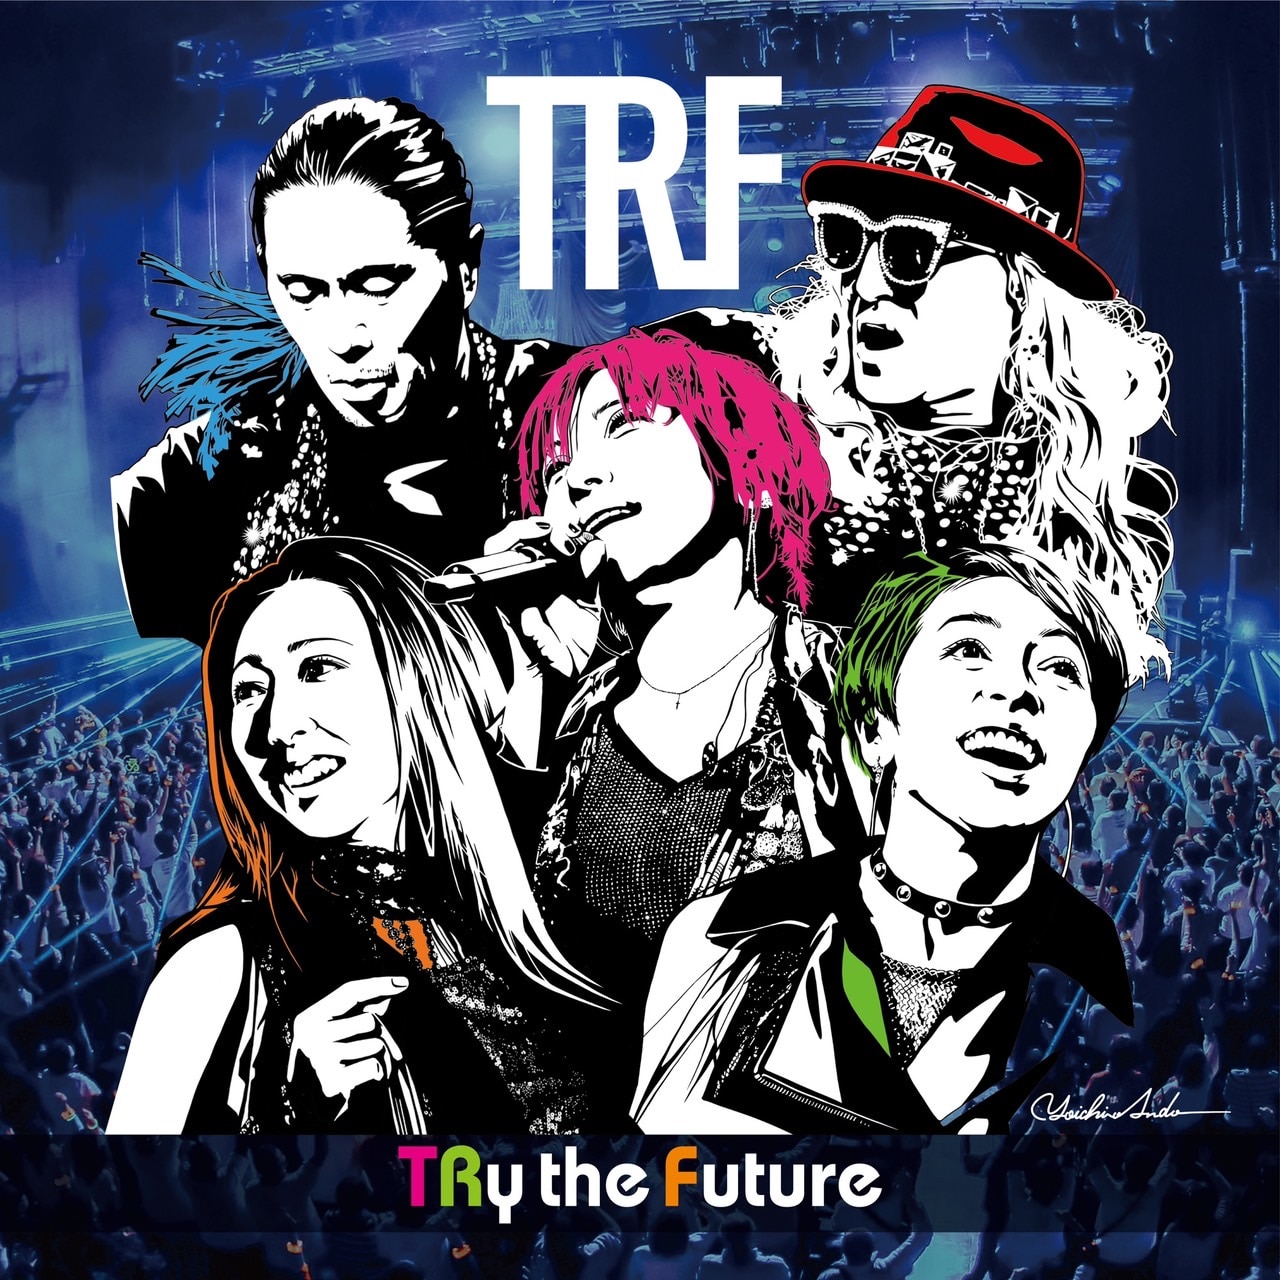 THE LIVE - DISCOGRAPHY | TRF Official Website